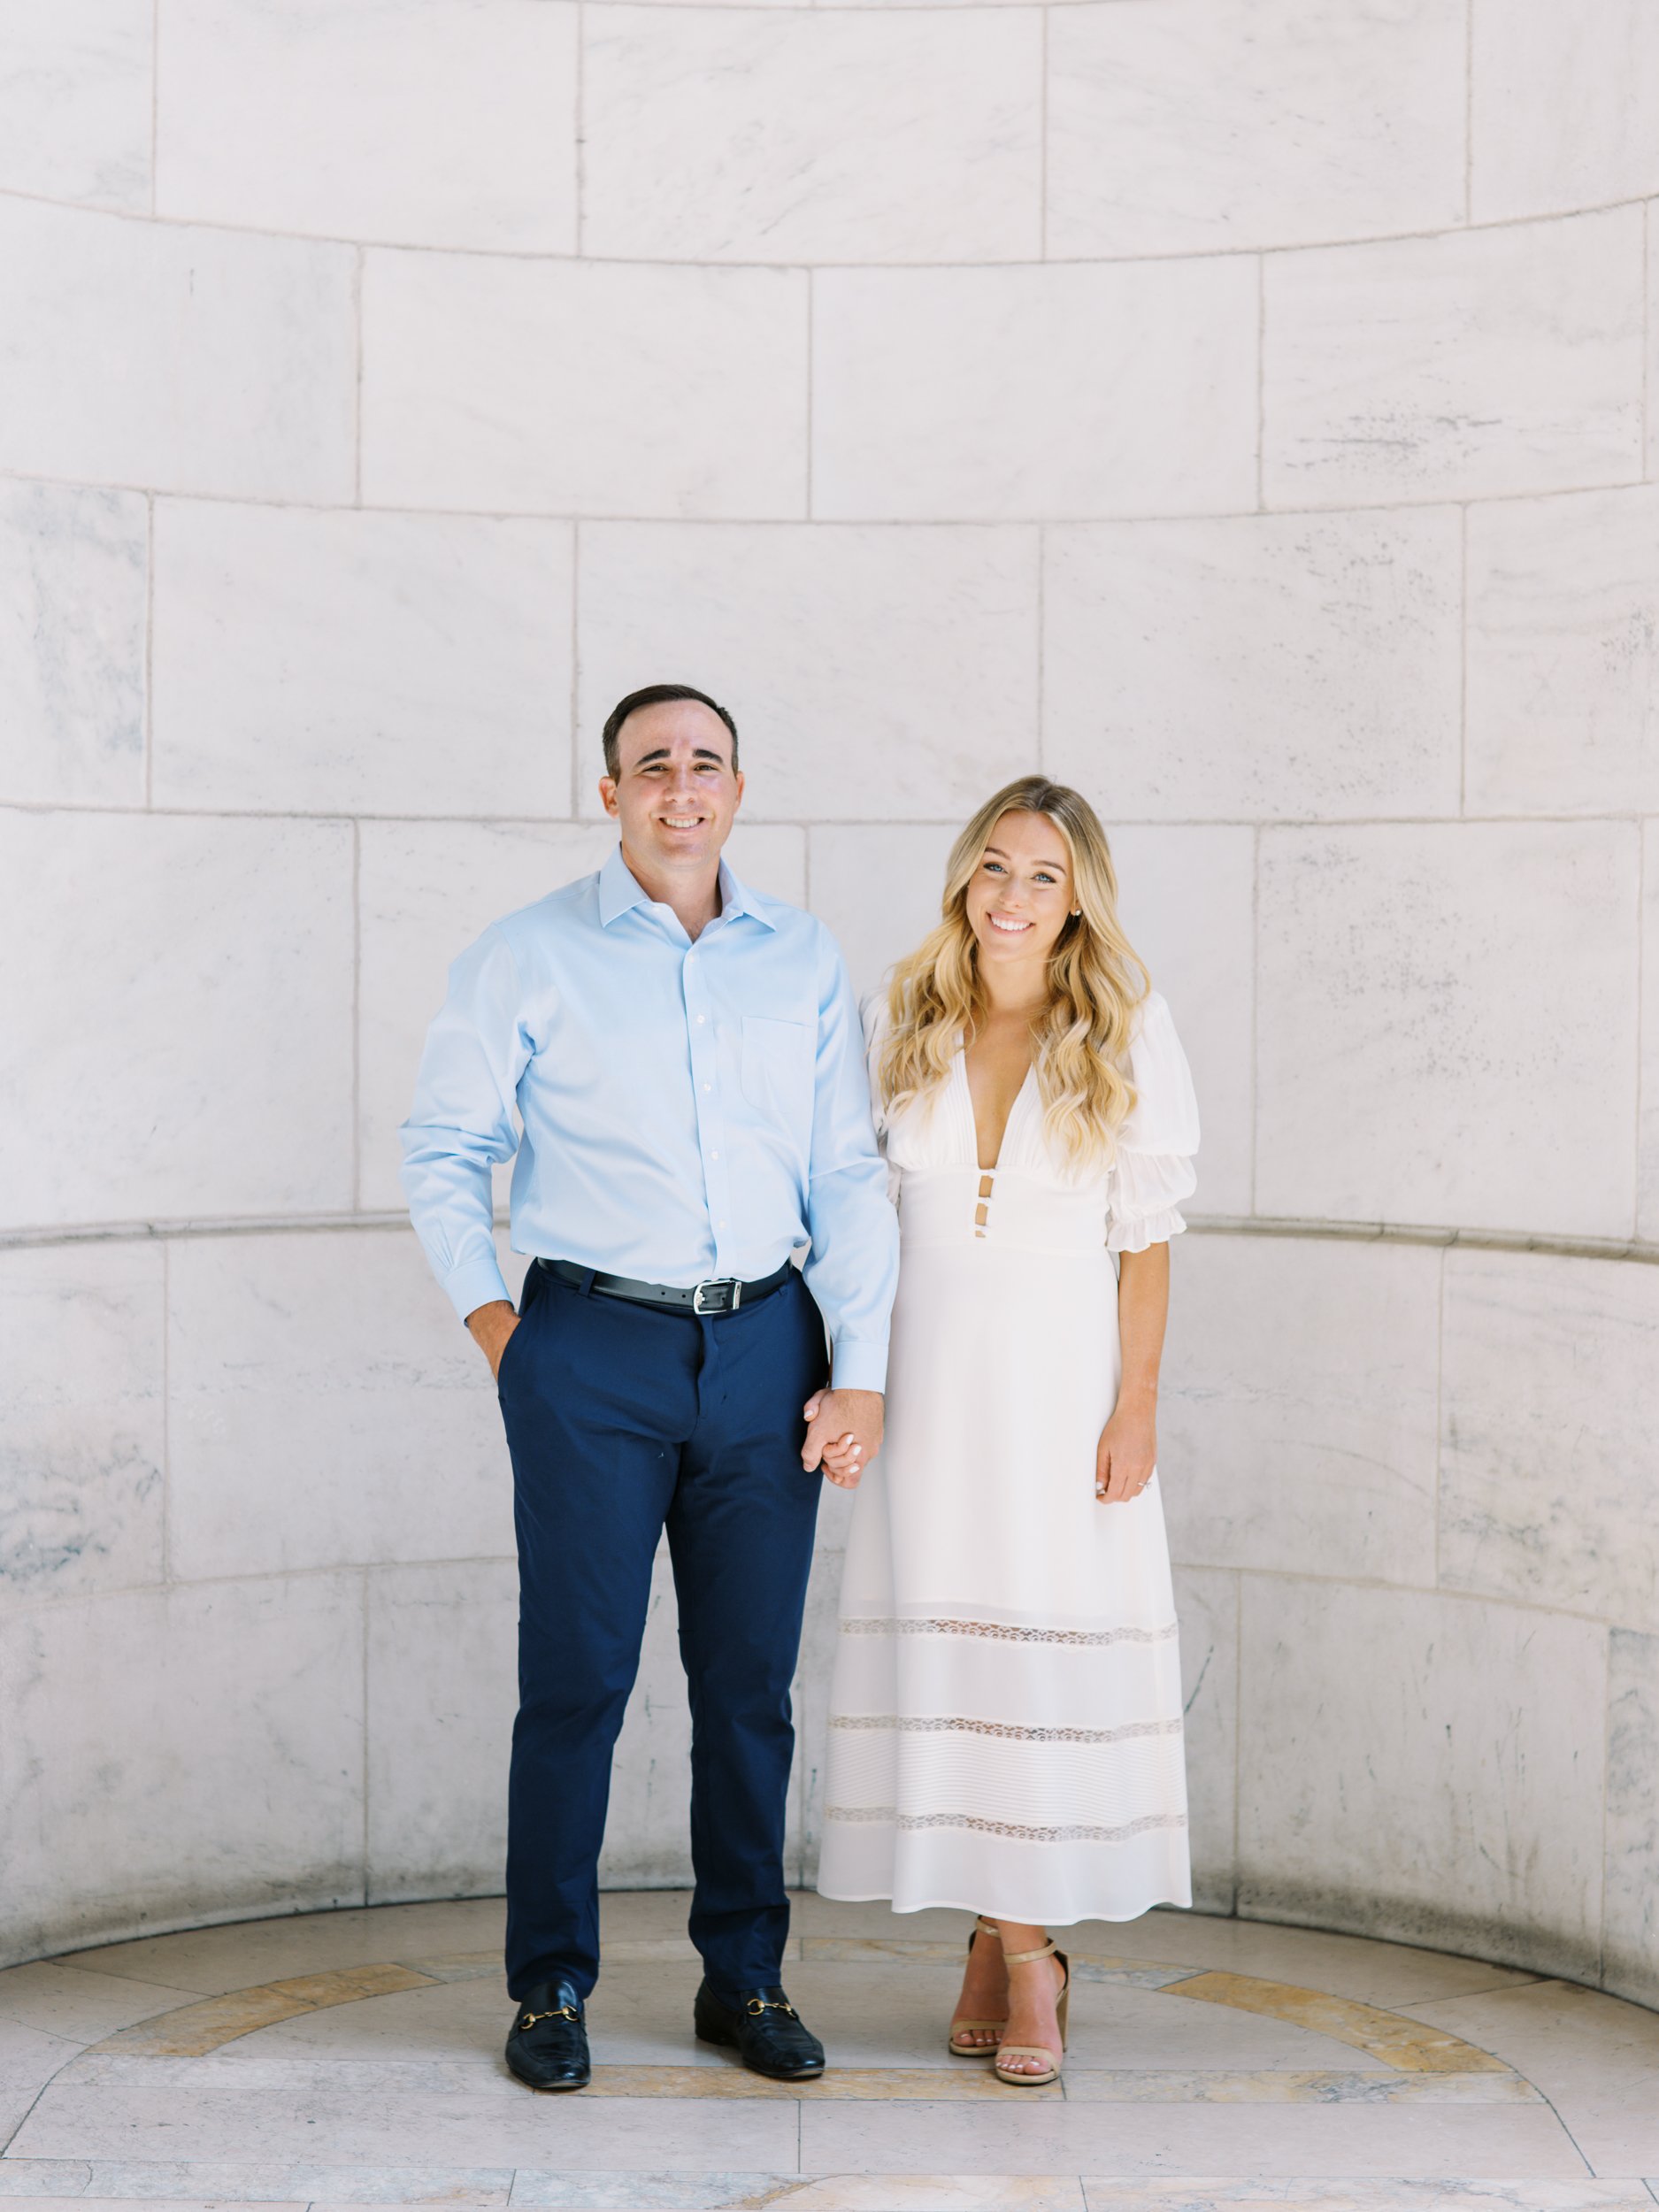 NEW YORK PUBLIC LIBRARY ENGAGEMENT PHOTOS